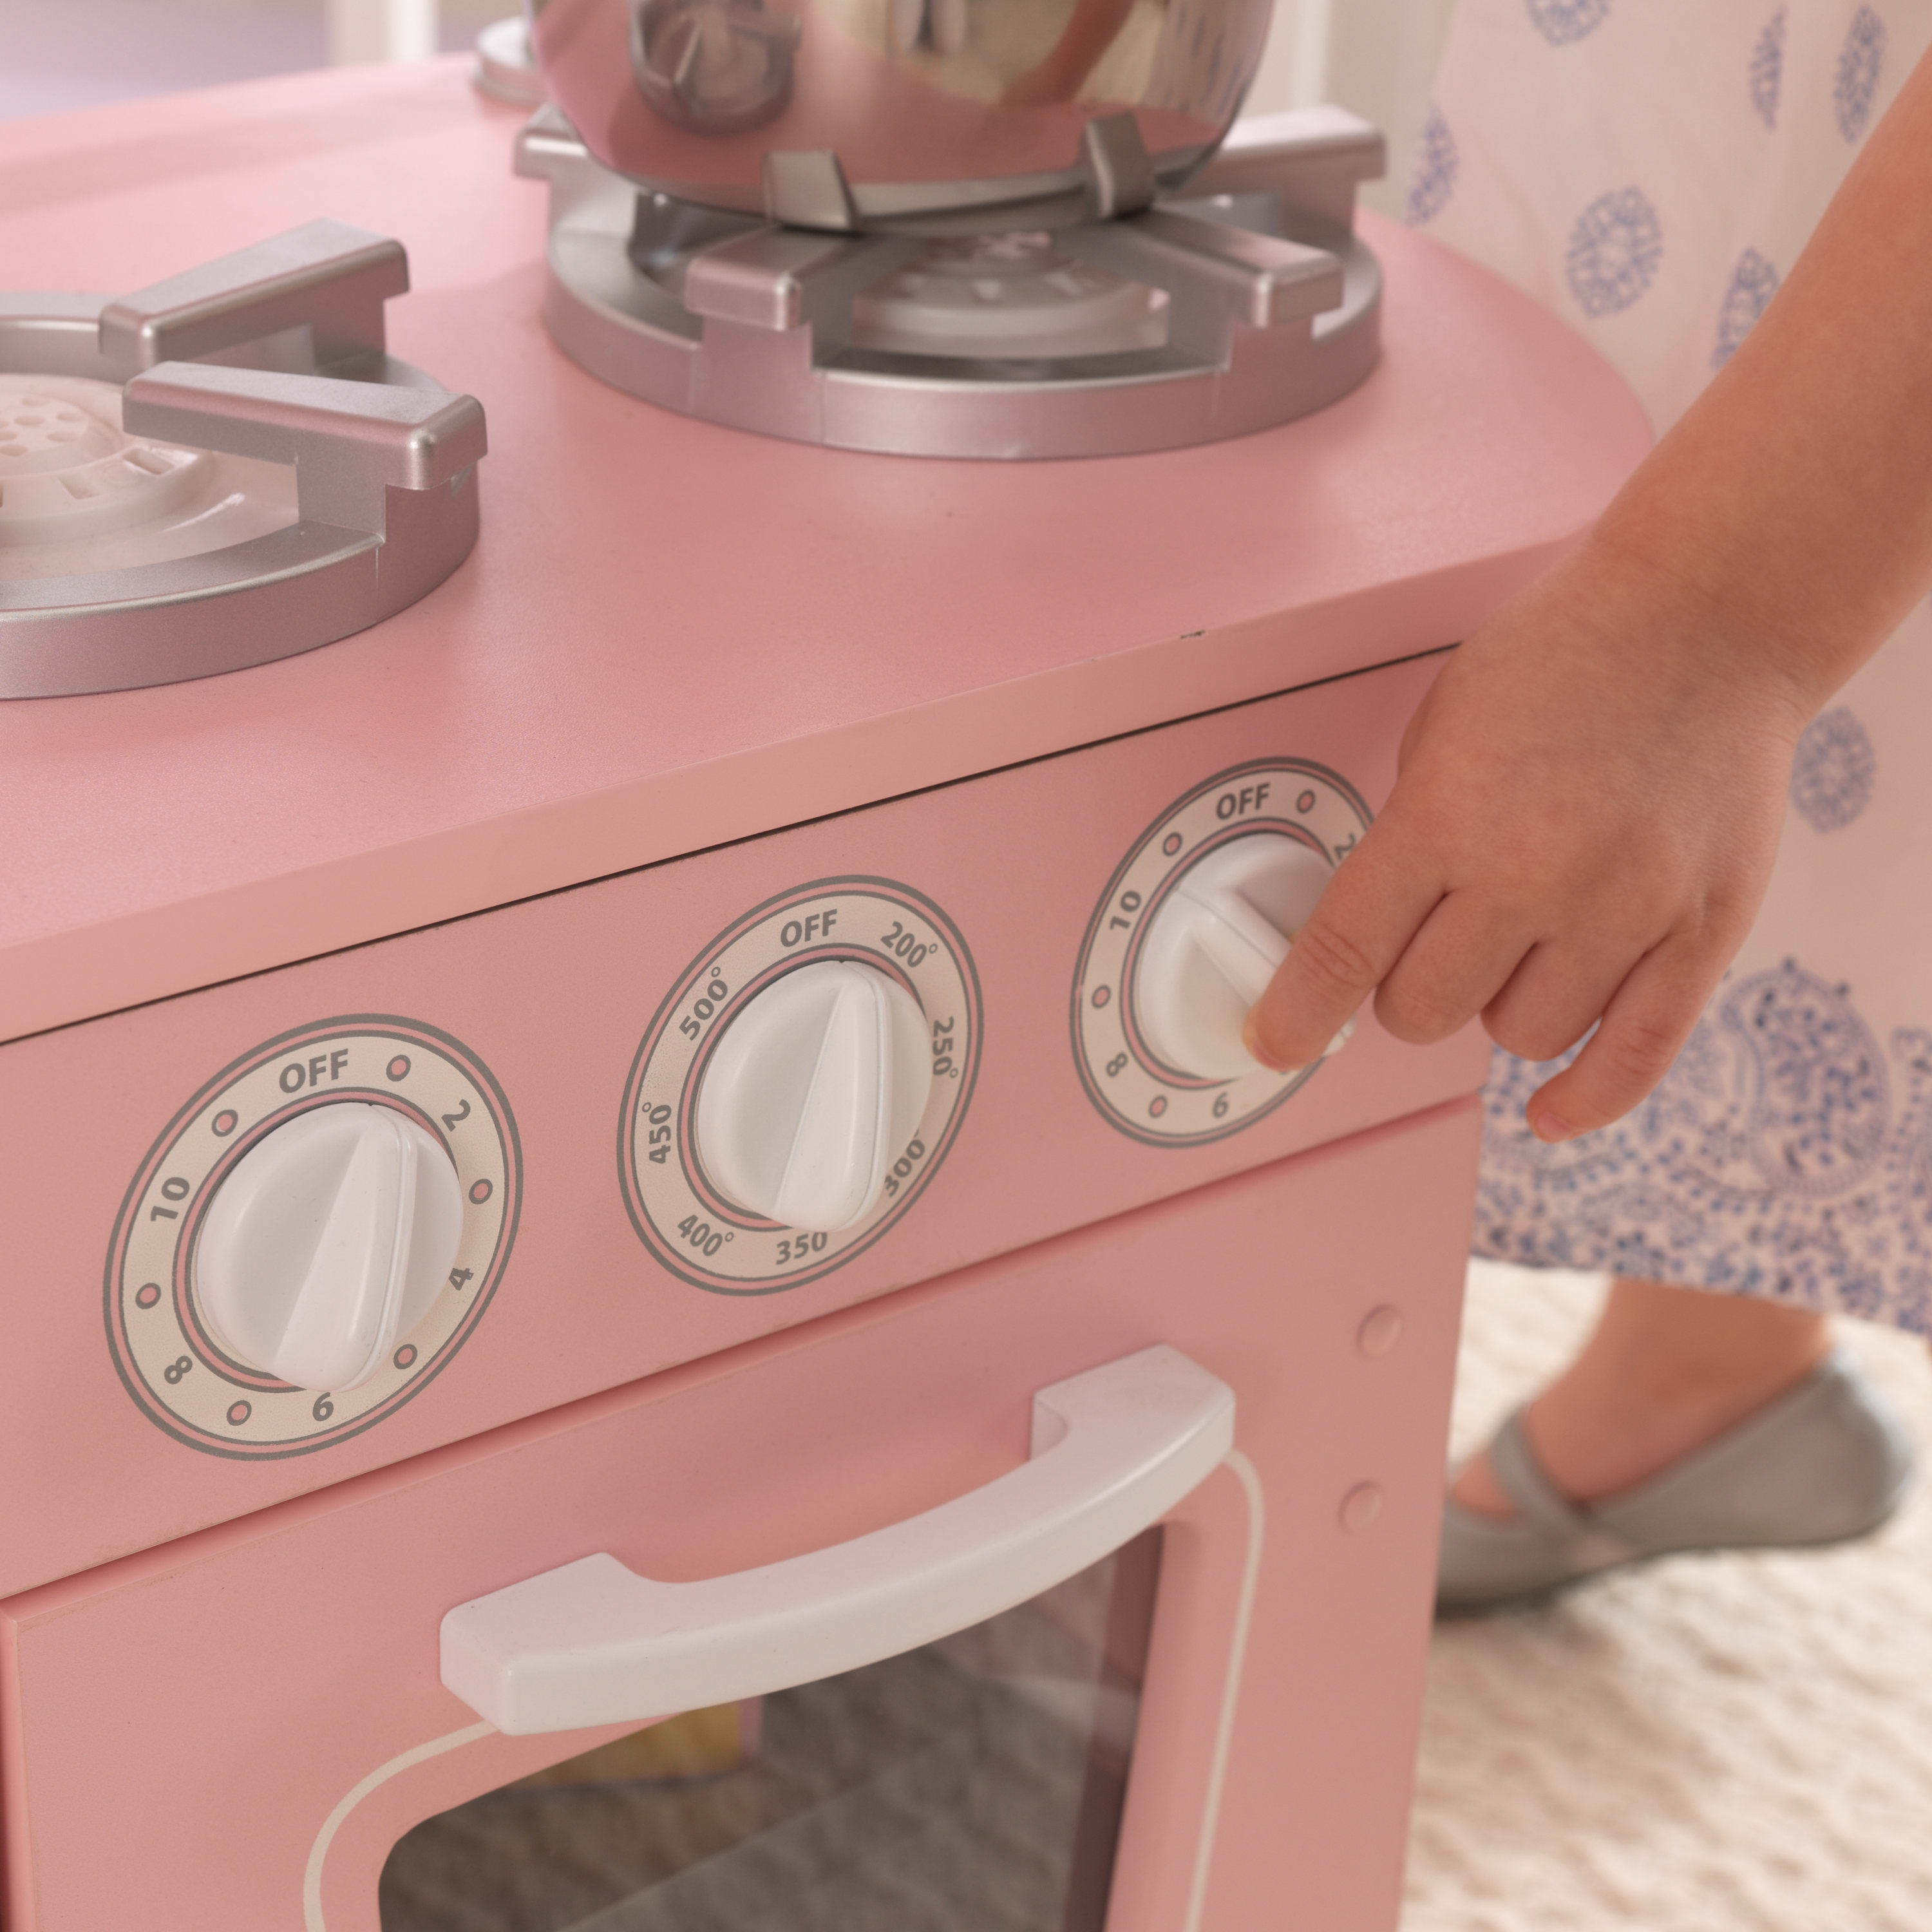 KidKraft Vintage Wooden Play Kitchen with Working Knobs, Pink - image 5 of 7